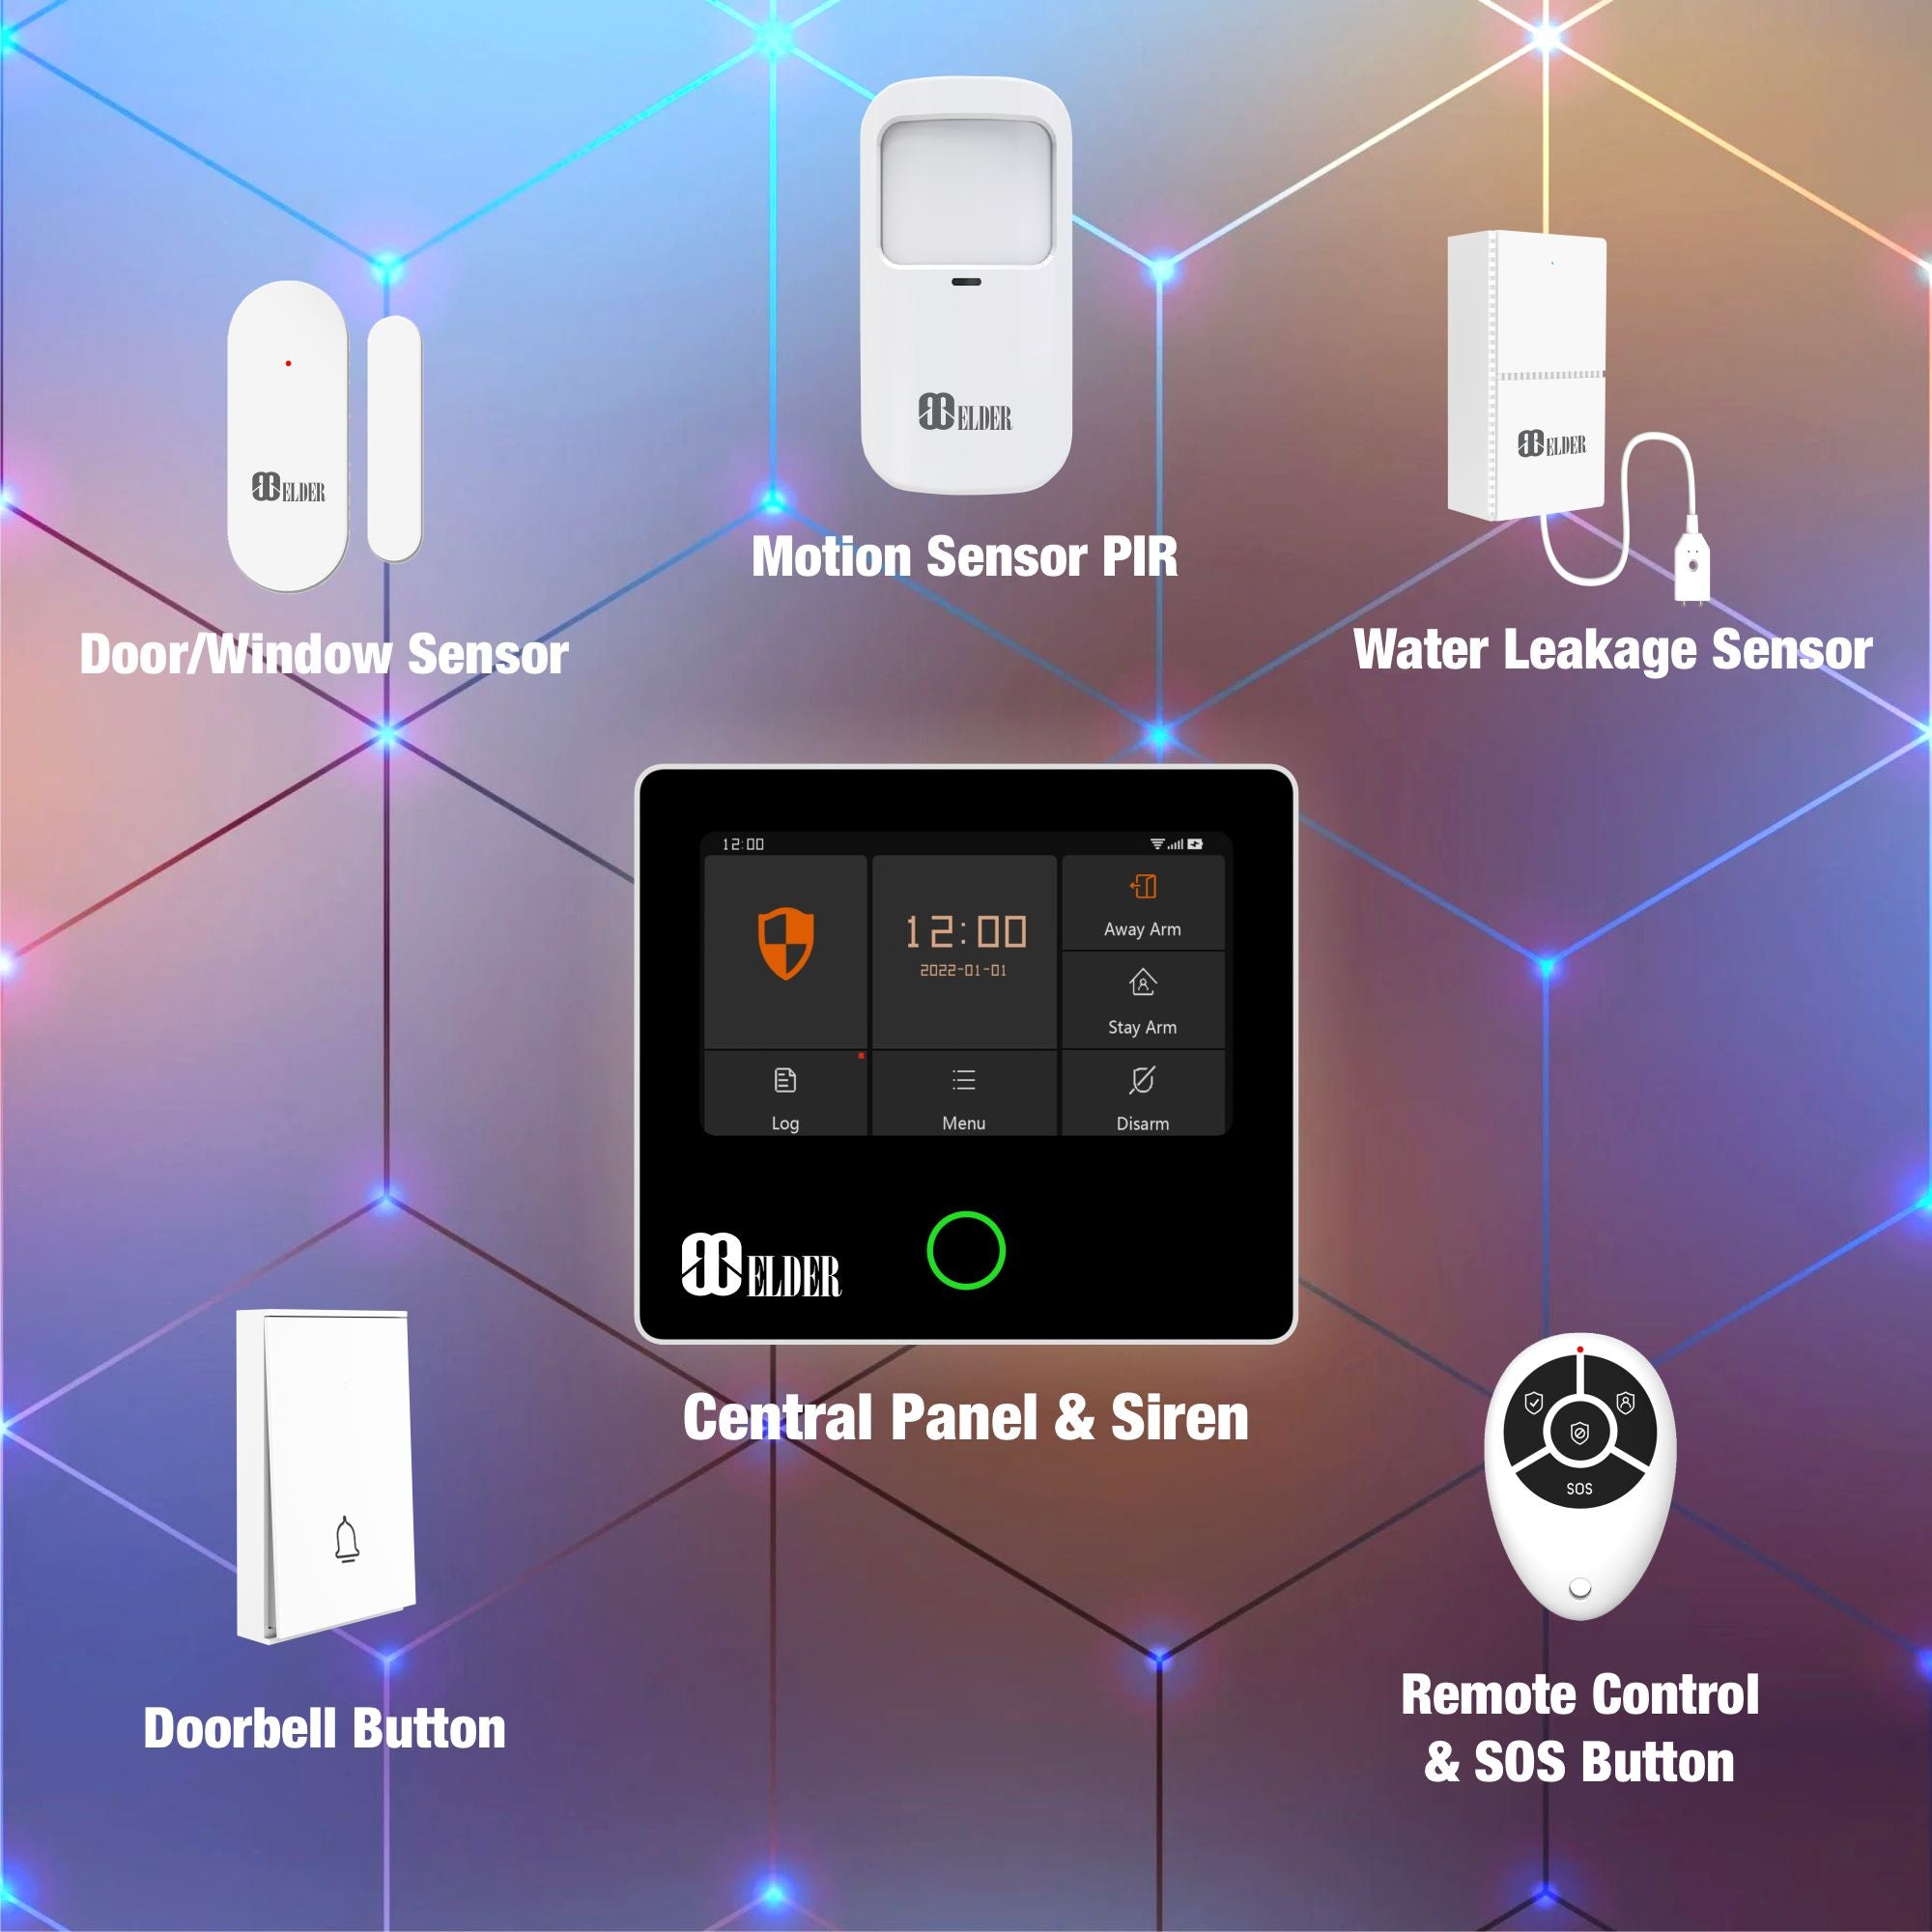 Water Leak Sensor WiFi Battery Wireless, Water Leakage Detector for Alarm System and Smart Home Automation